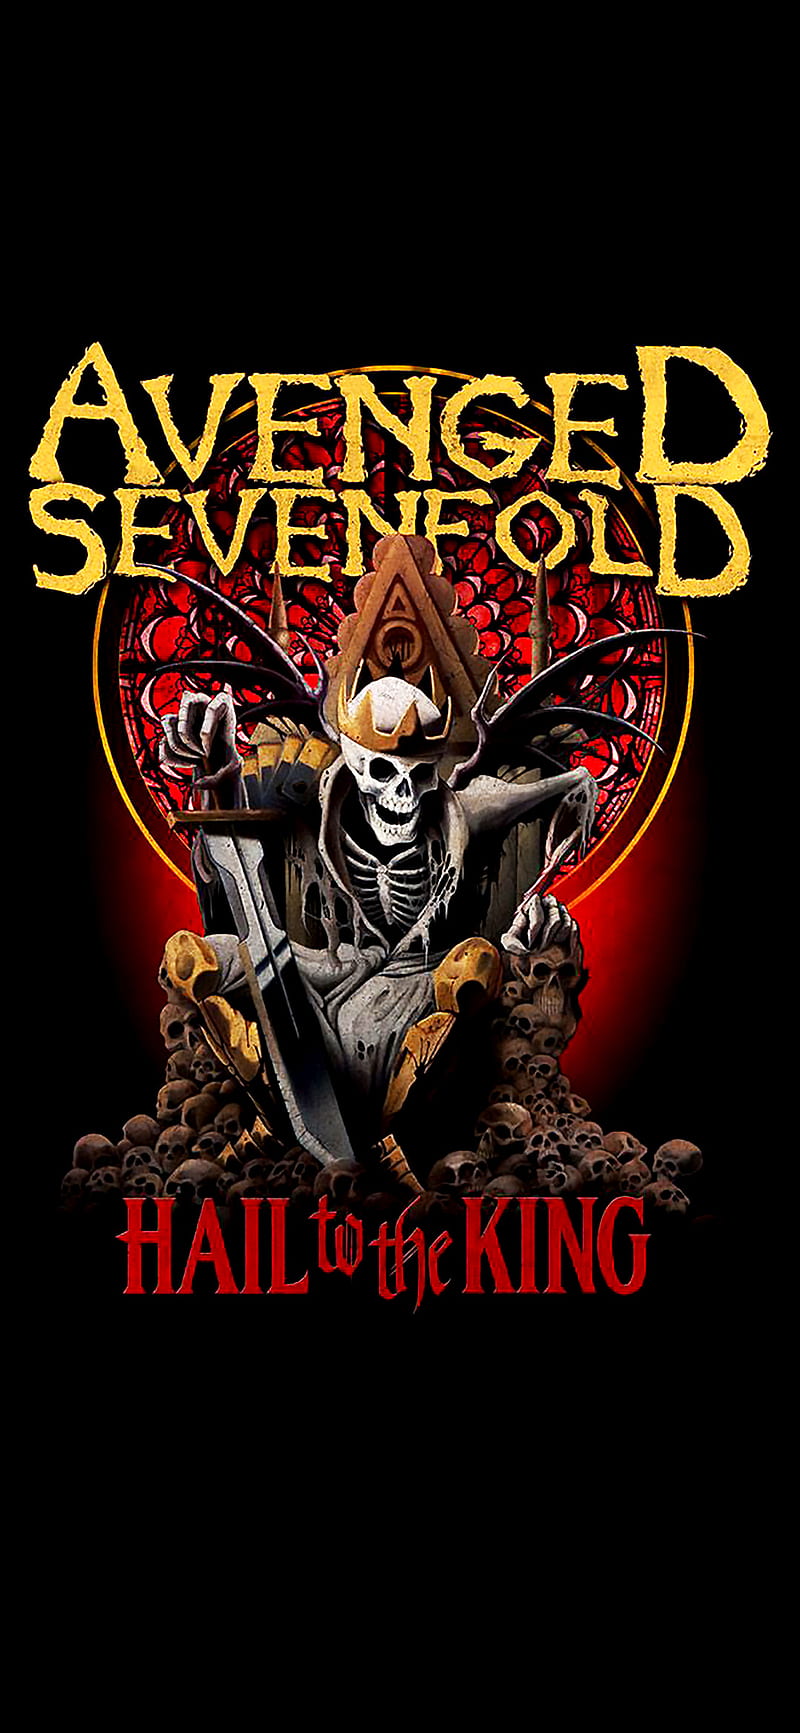 Avenged Sevenfold, album cover, cover art, hail to the king, mobile background, HD phone wallpaper